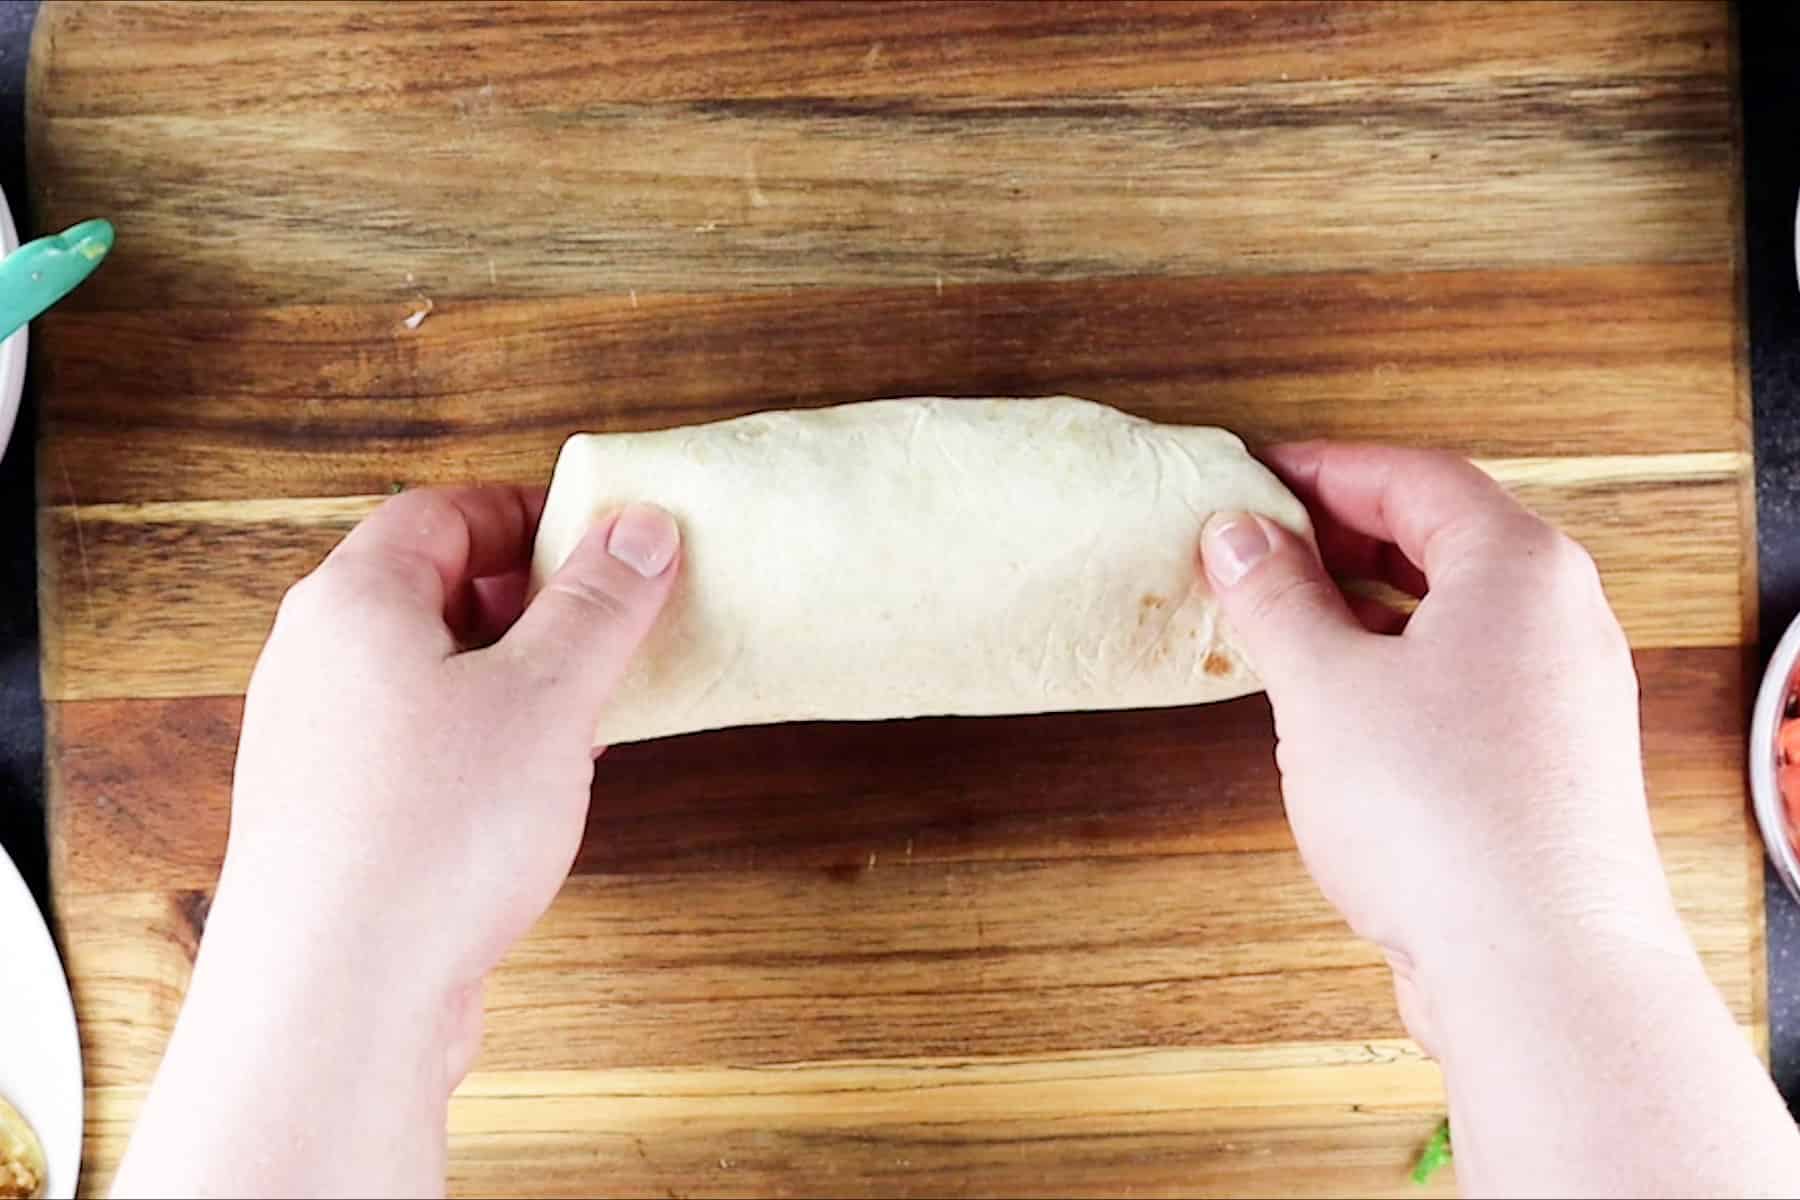 a finished rolled burrito